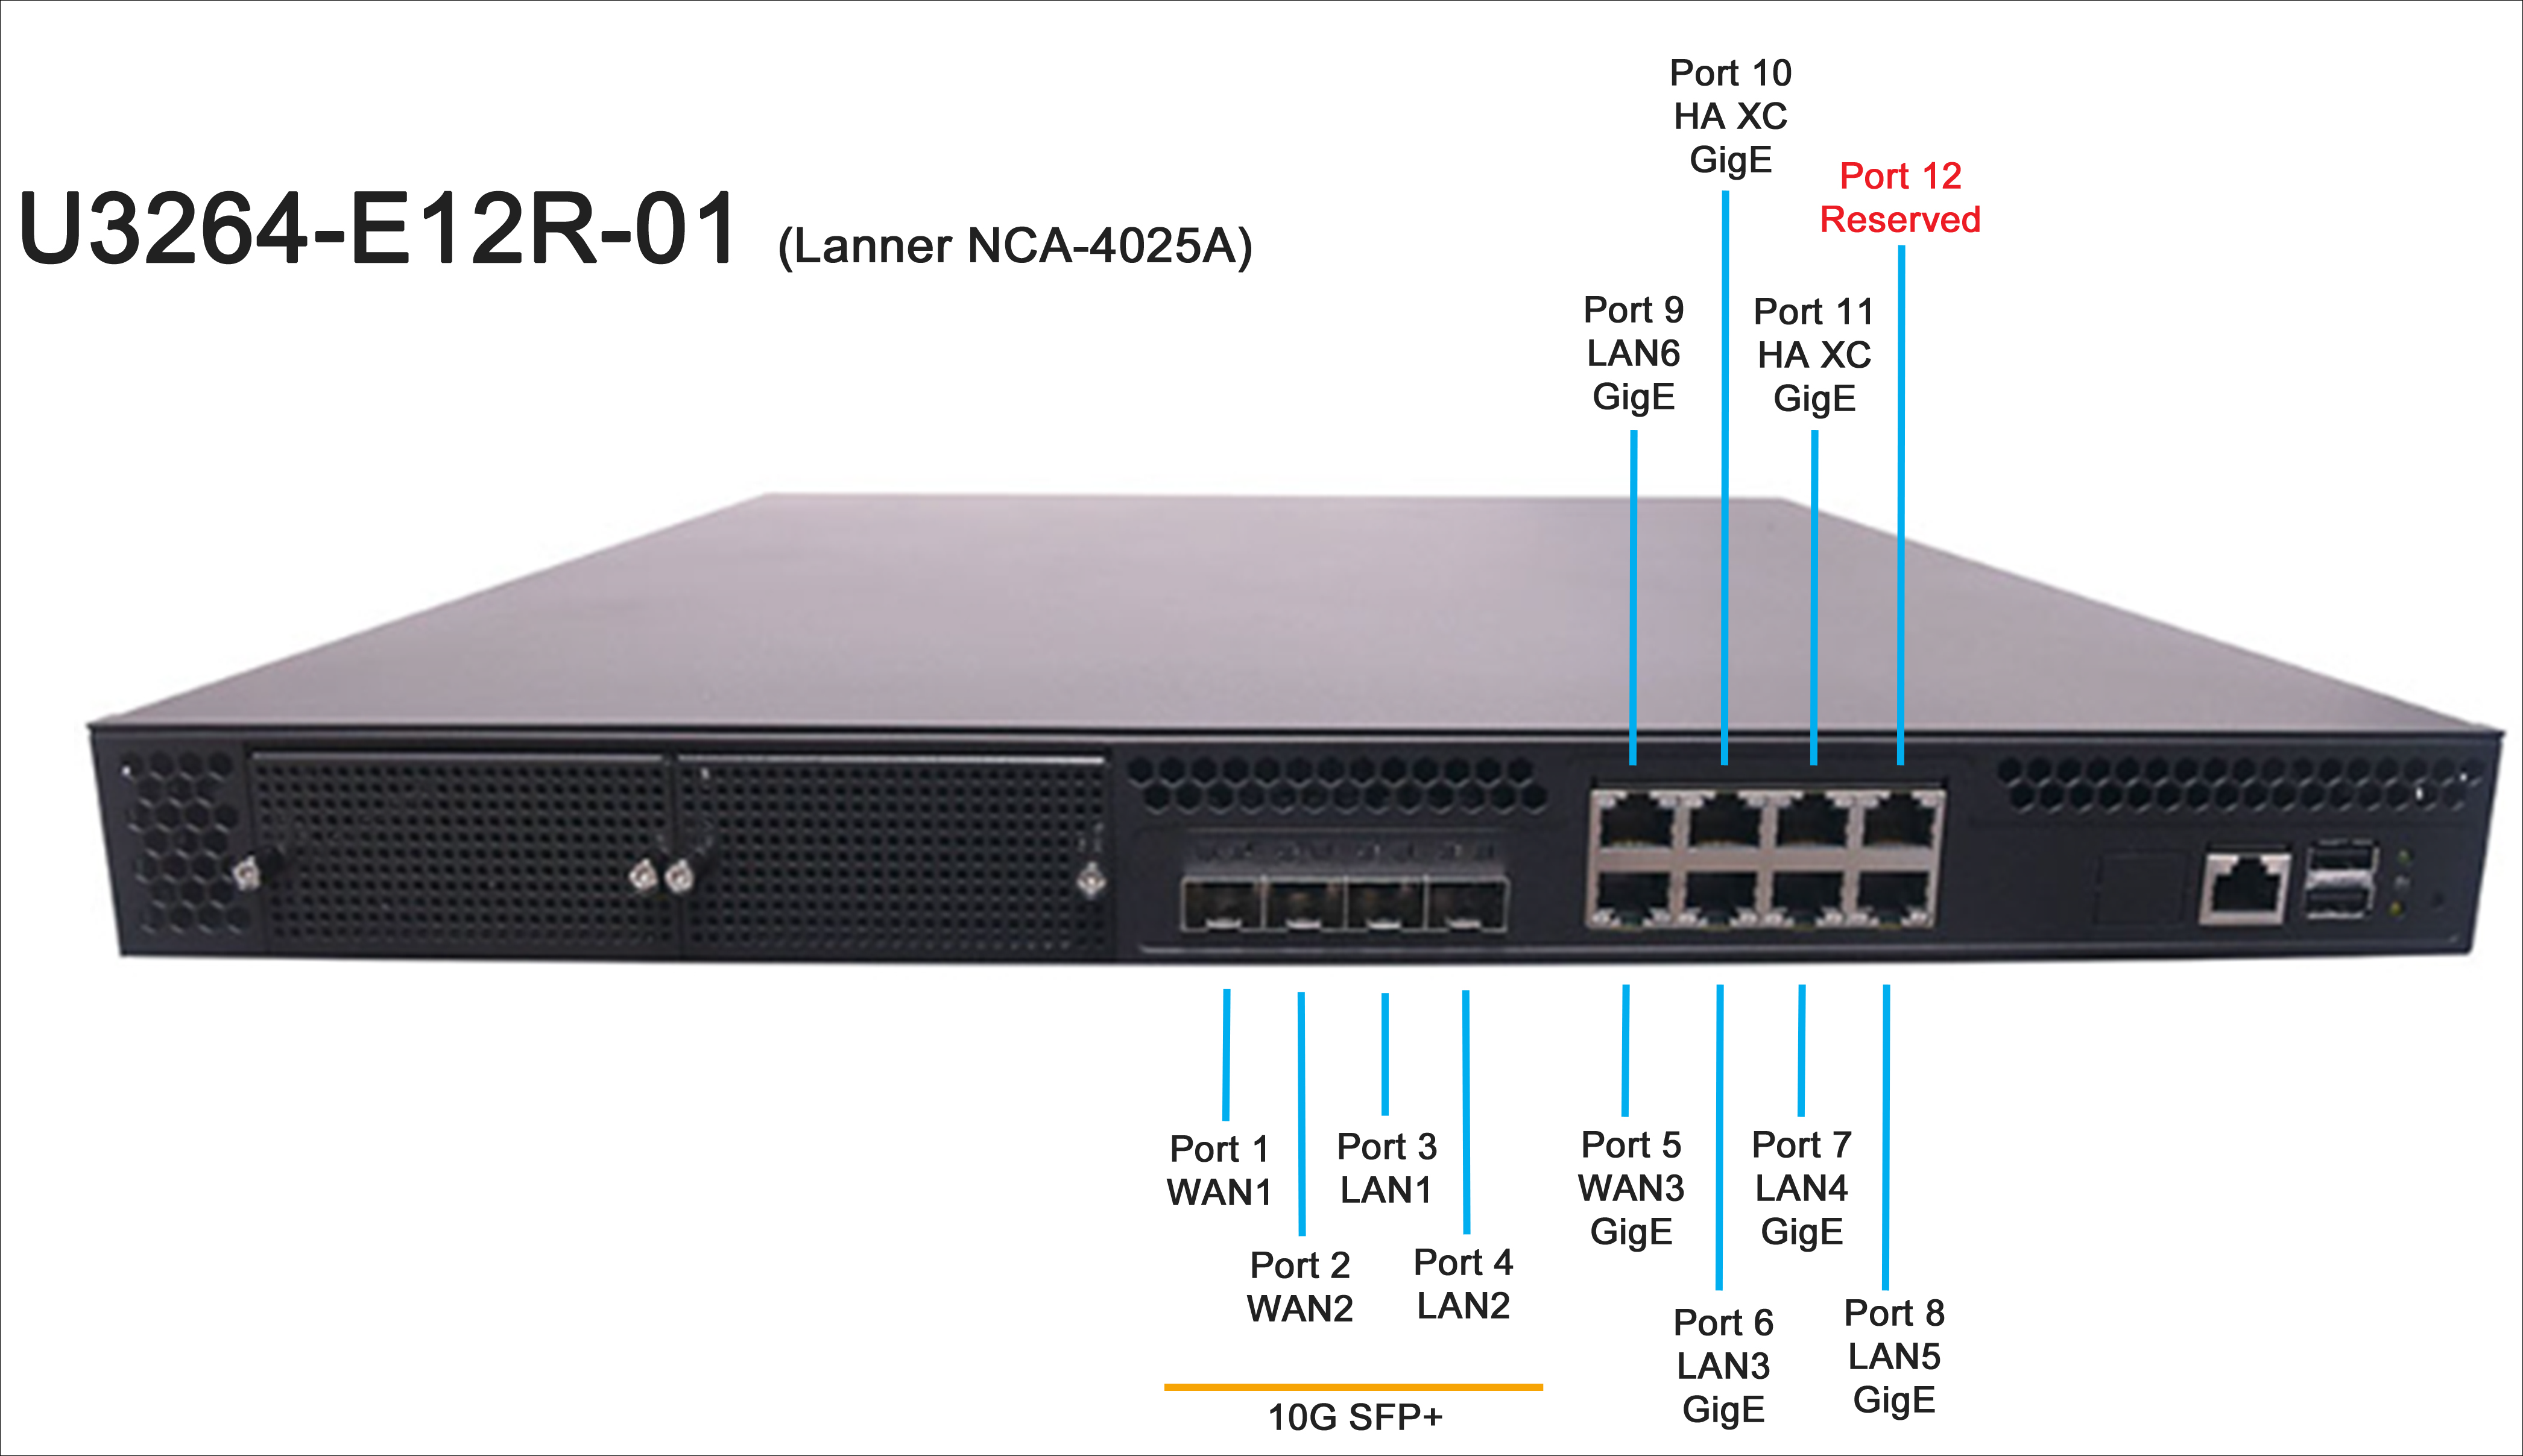 Service ports on the Edge Gateway device (Lanner 4025 series).